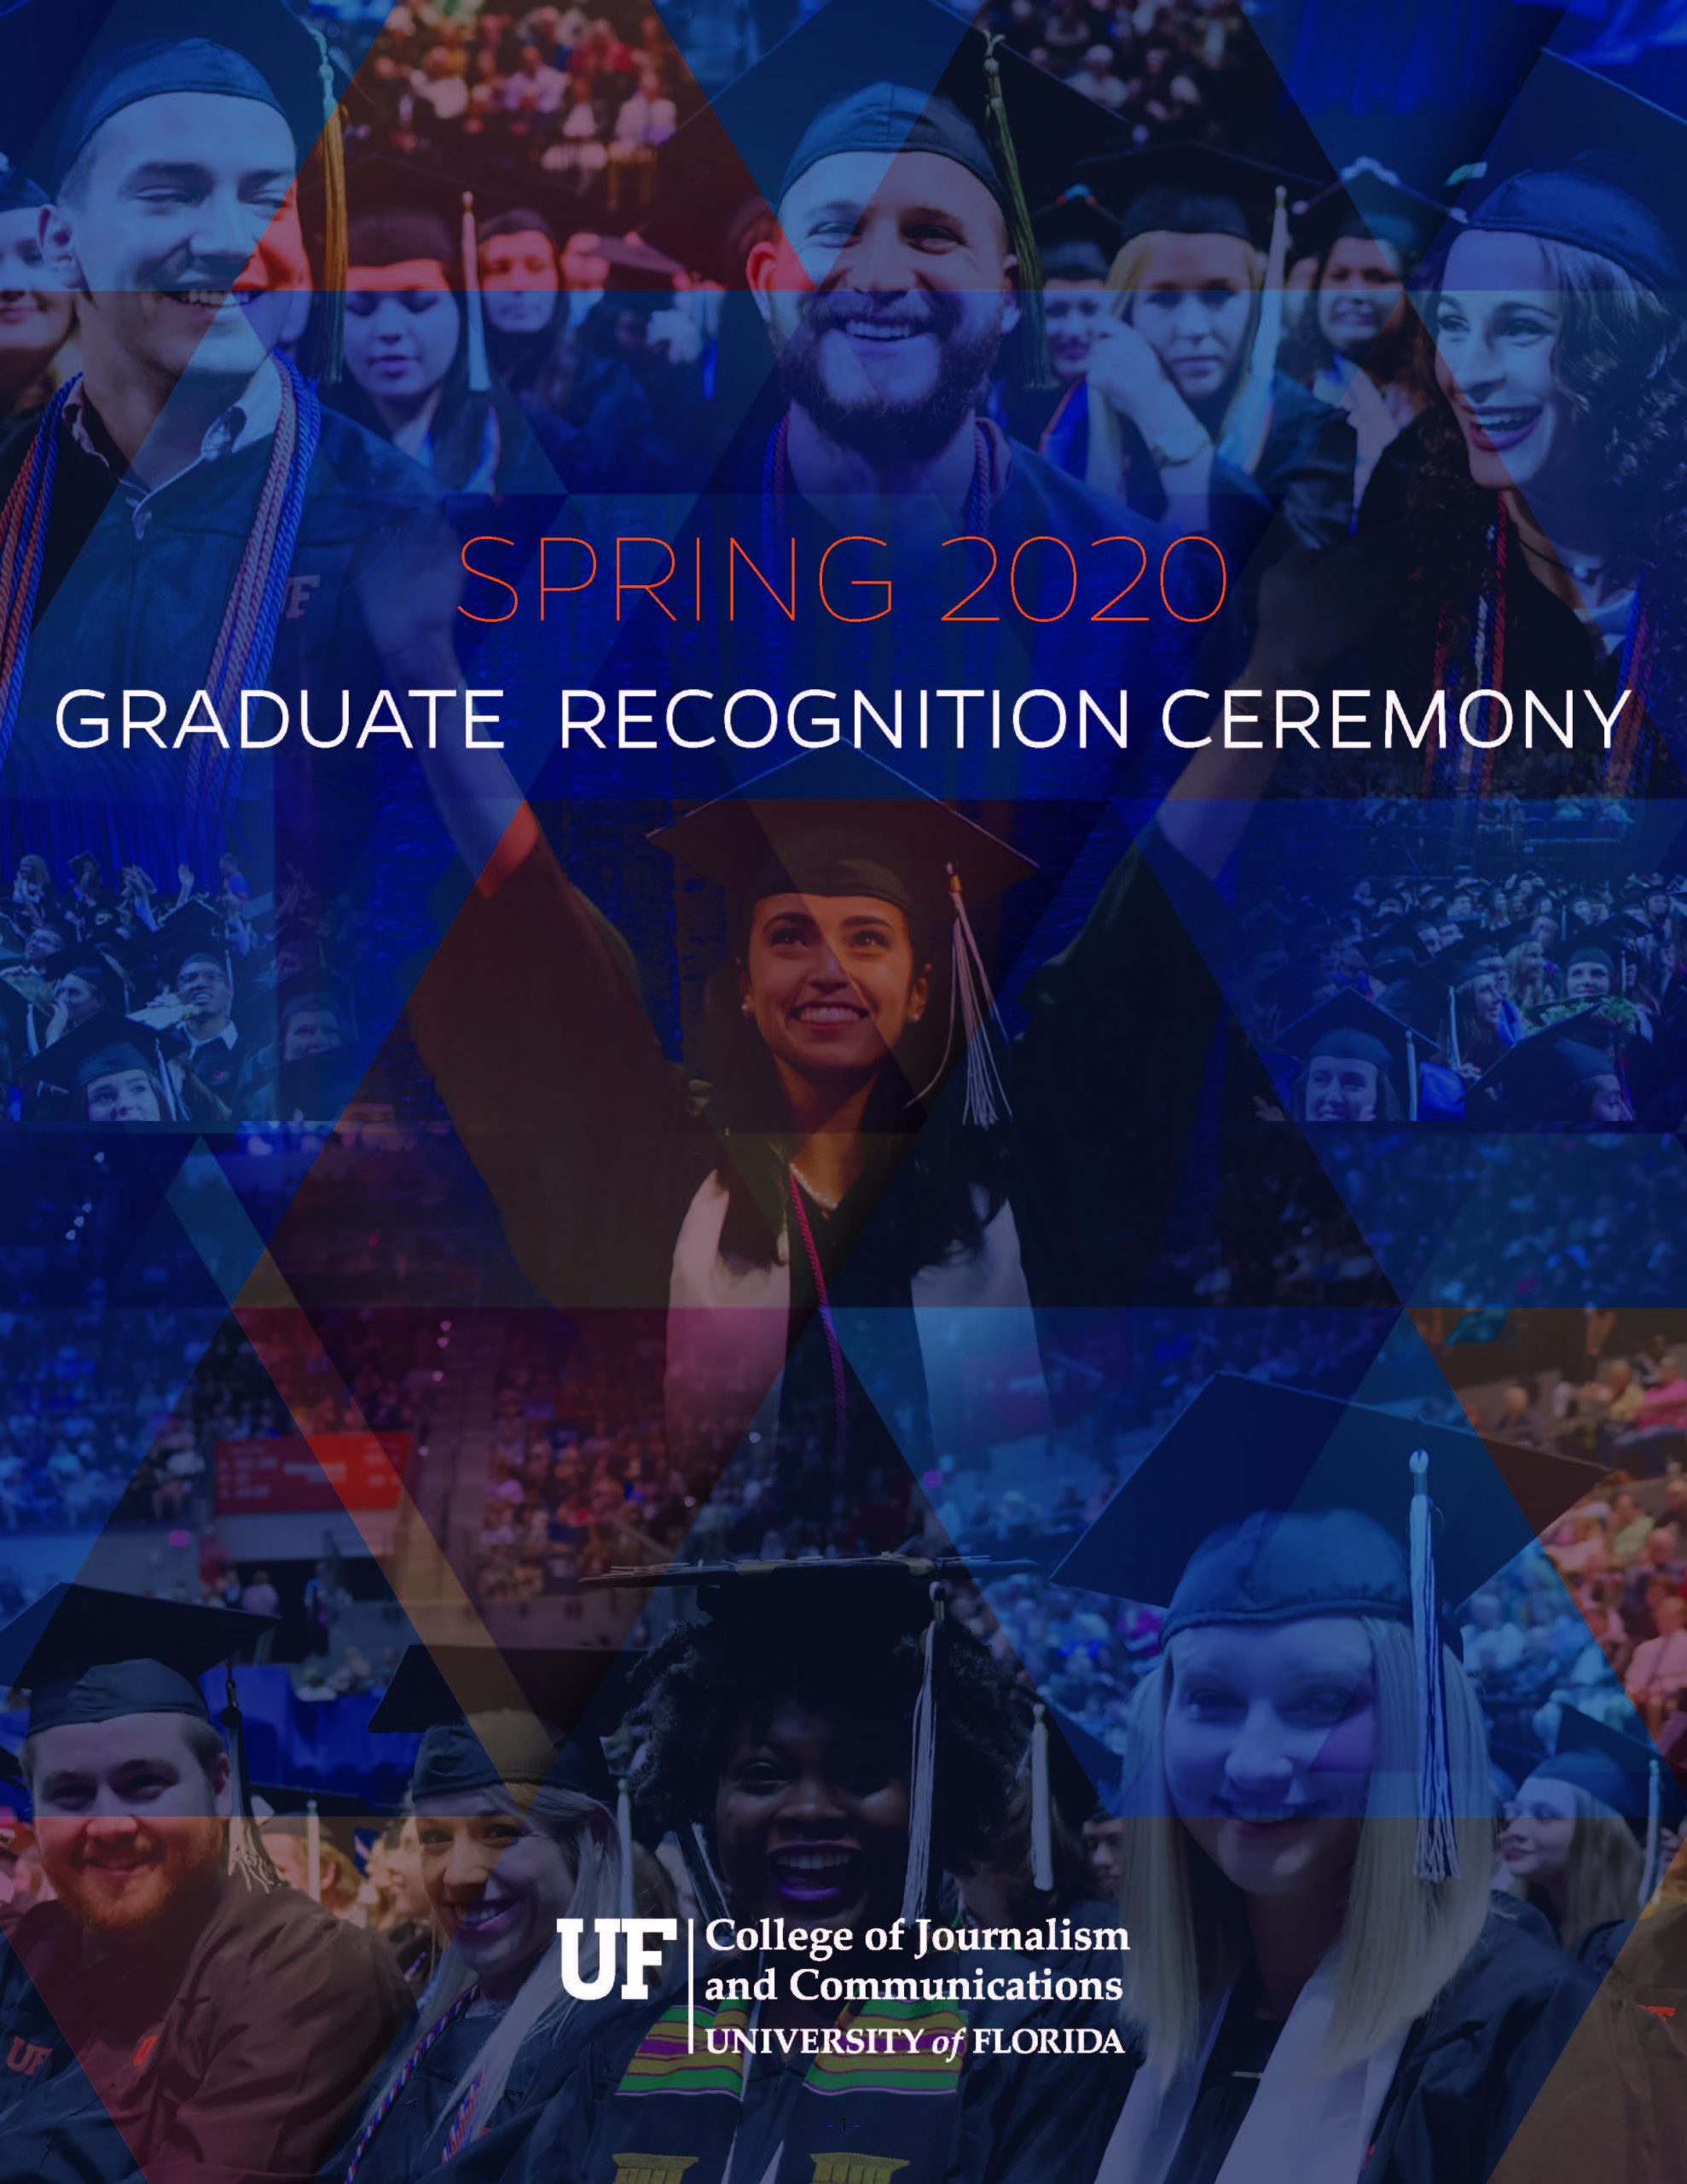 Spring 2020 Commencement UF College of Journalism and Communications